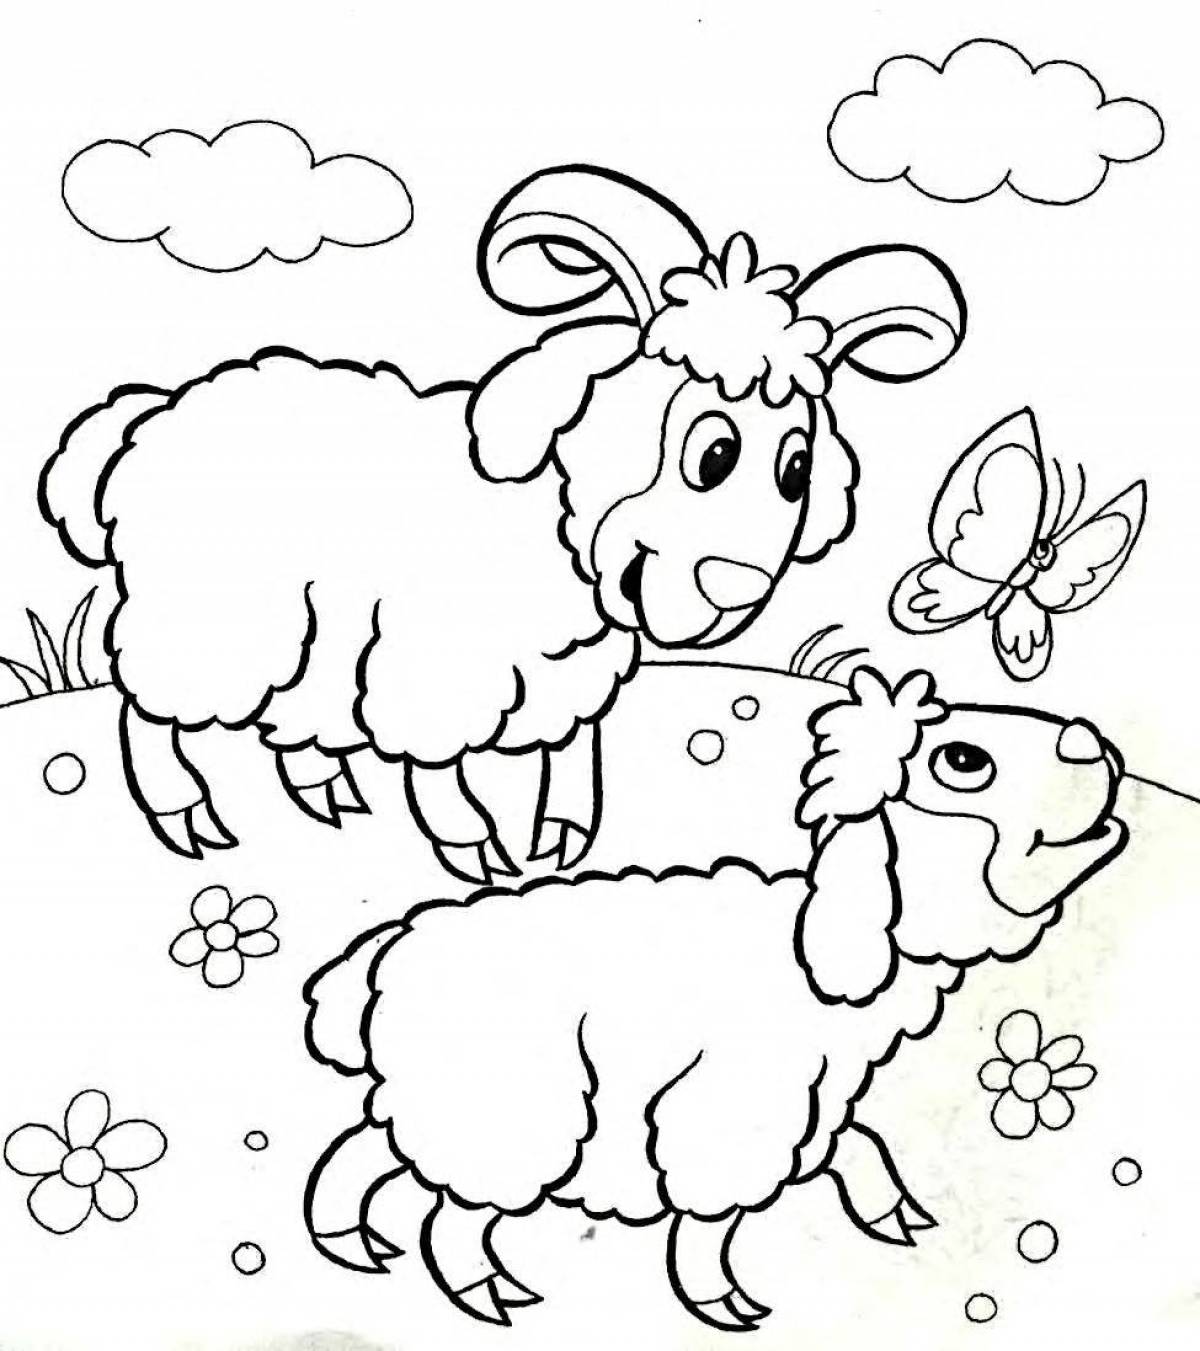 Adorable pet coloring book for 6-7 year olds